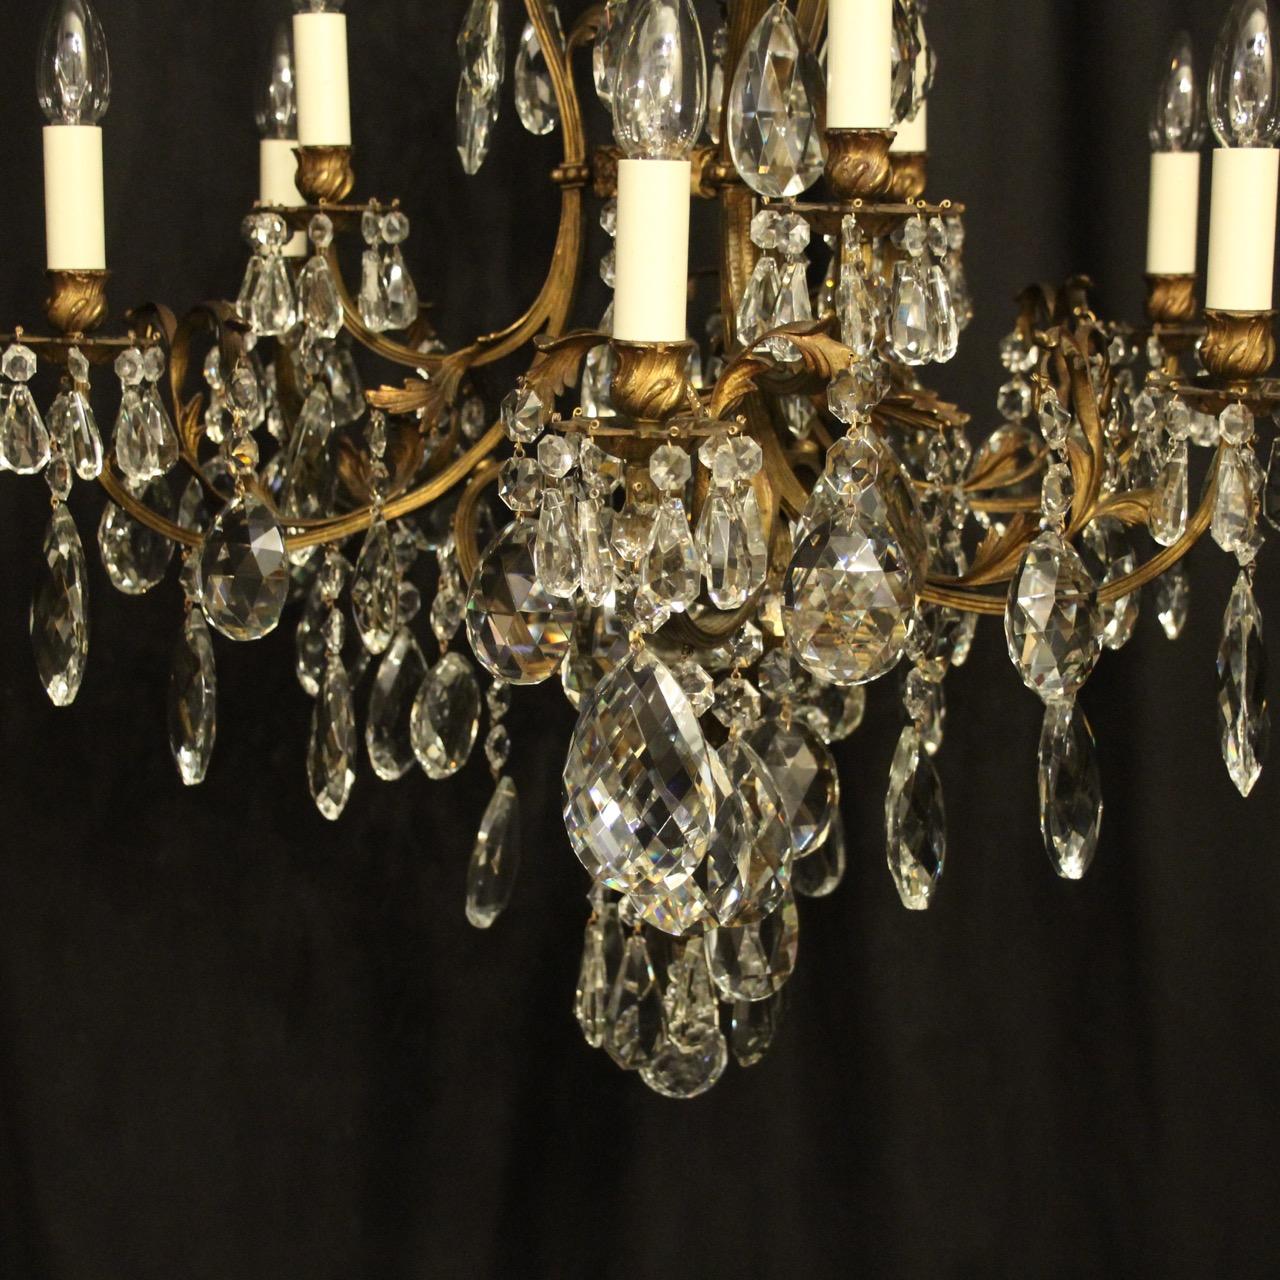 20th Century French Gilded Bronze & Crystal 10 Light Birdcage Antique Chandelier